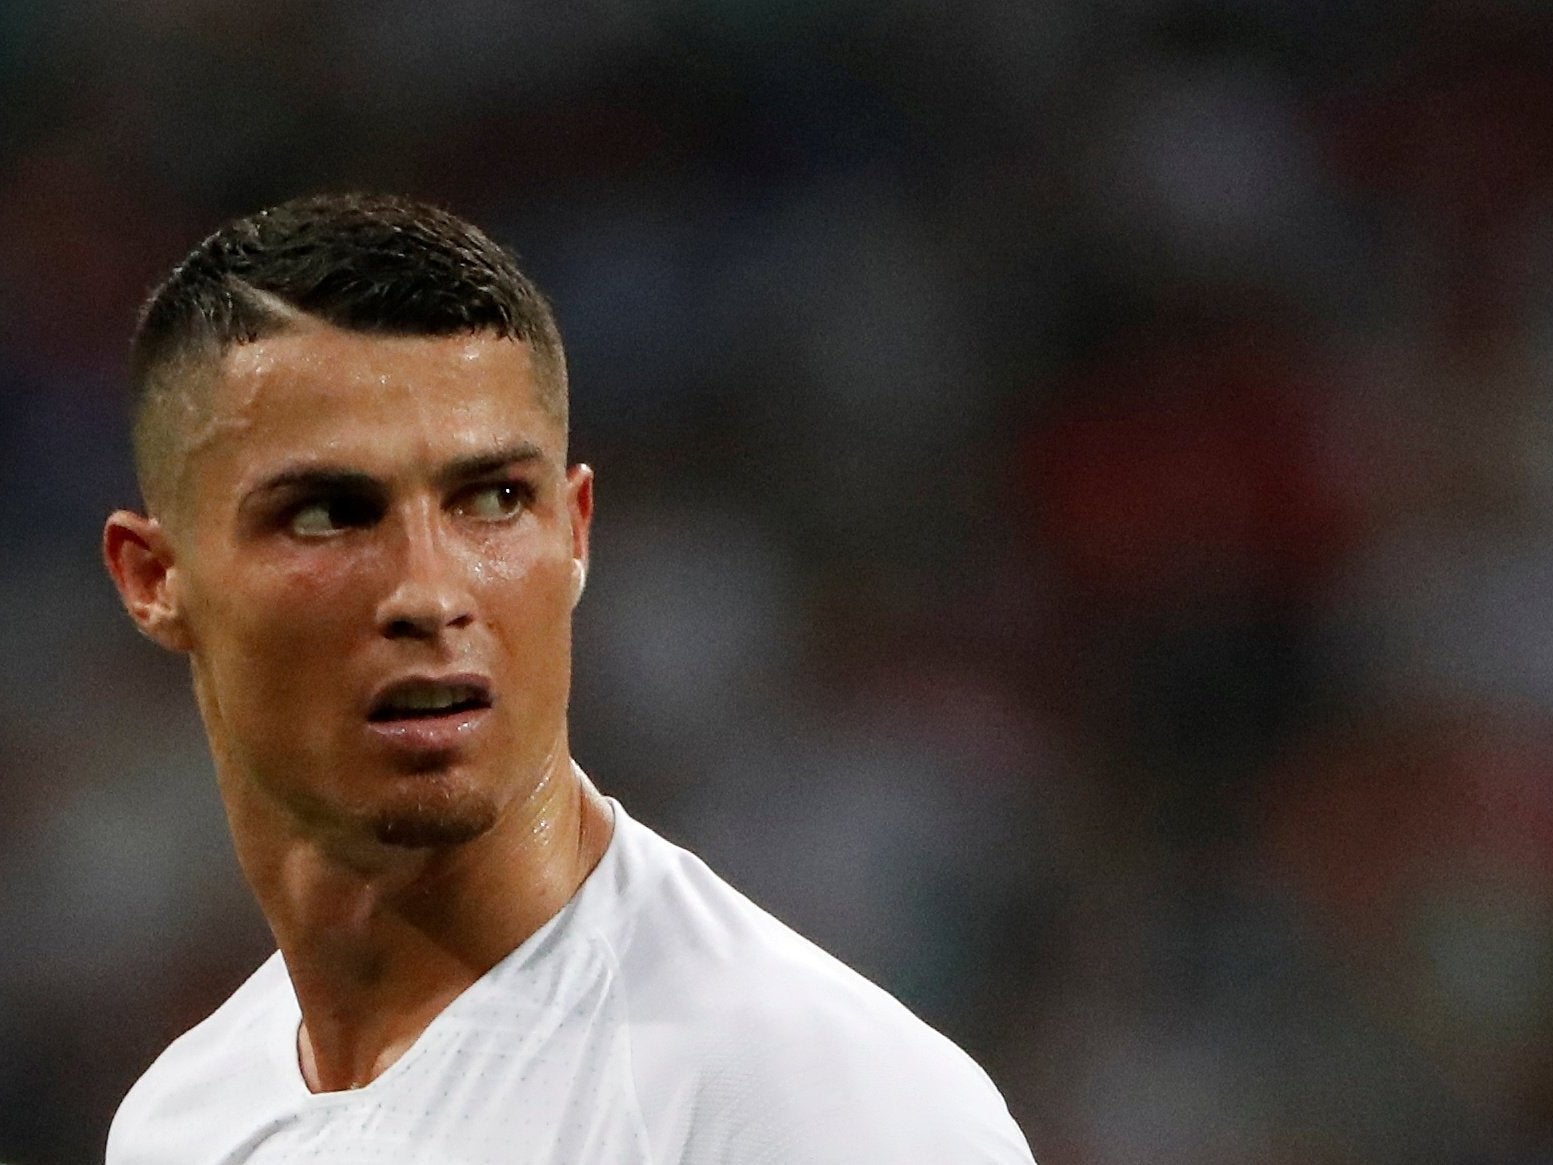 Juventus forward Cristiano Ronaldo left out of Portugal squad for matches against Poland and Scotland